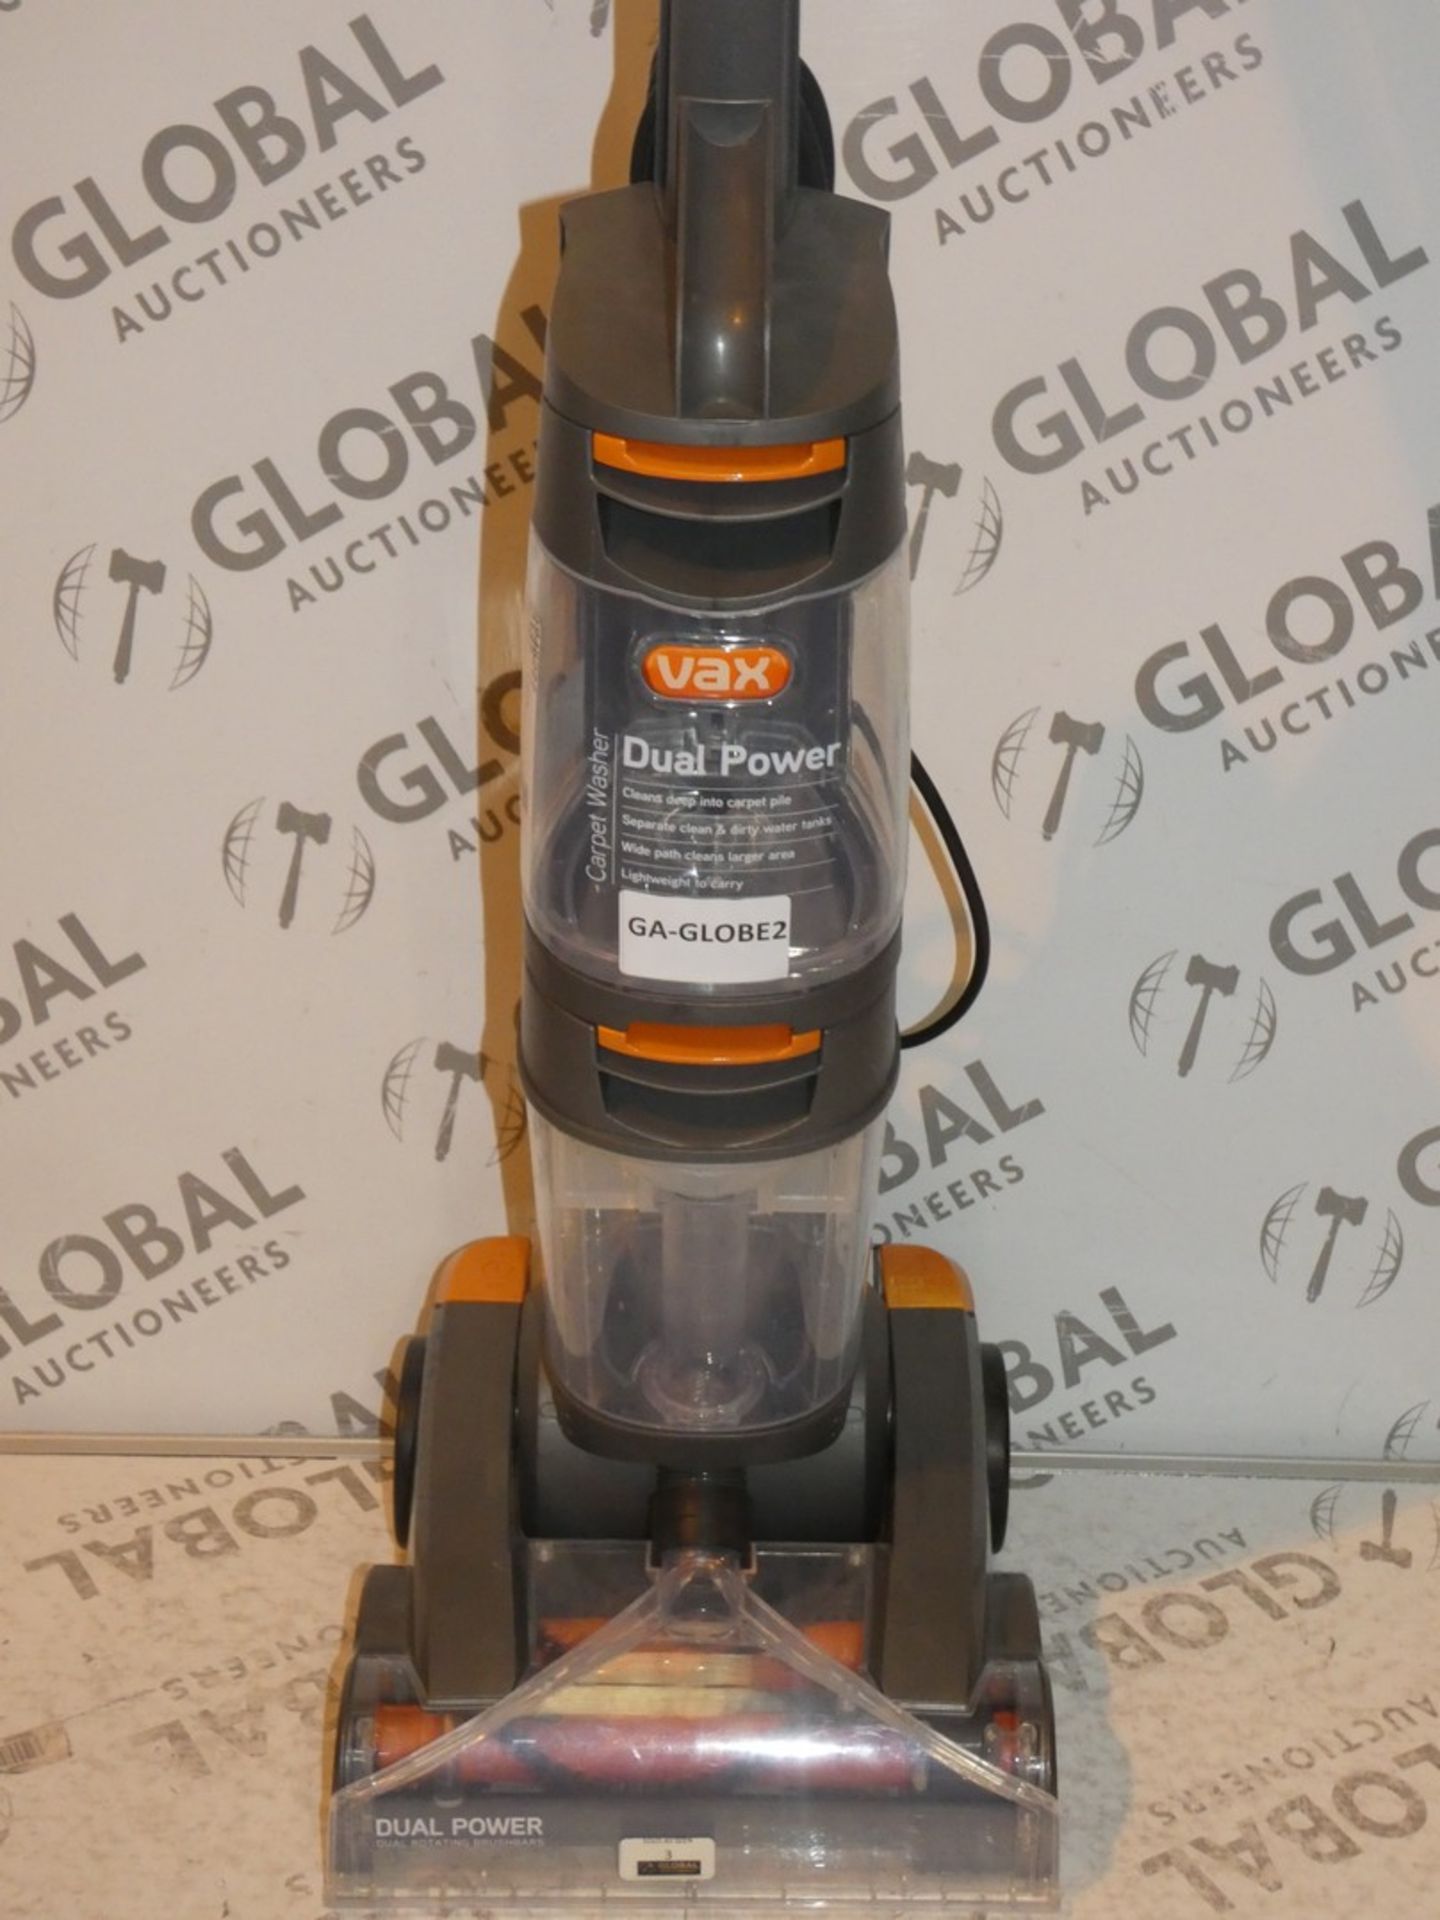 Vax Dual Power Carpet Washer RRP £130 (Viewings And Appraisals Are Highly Recommended)